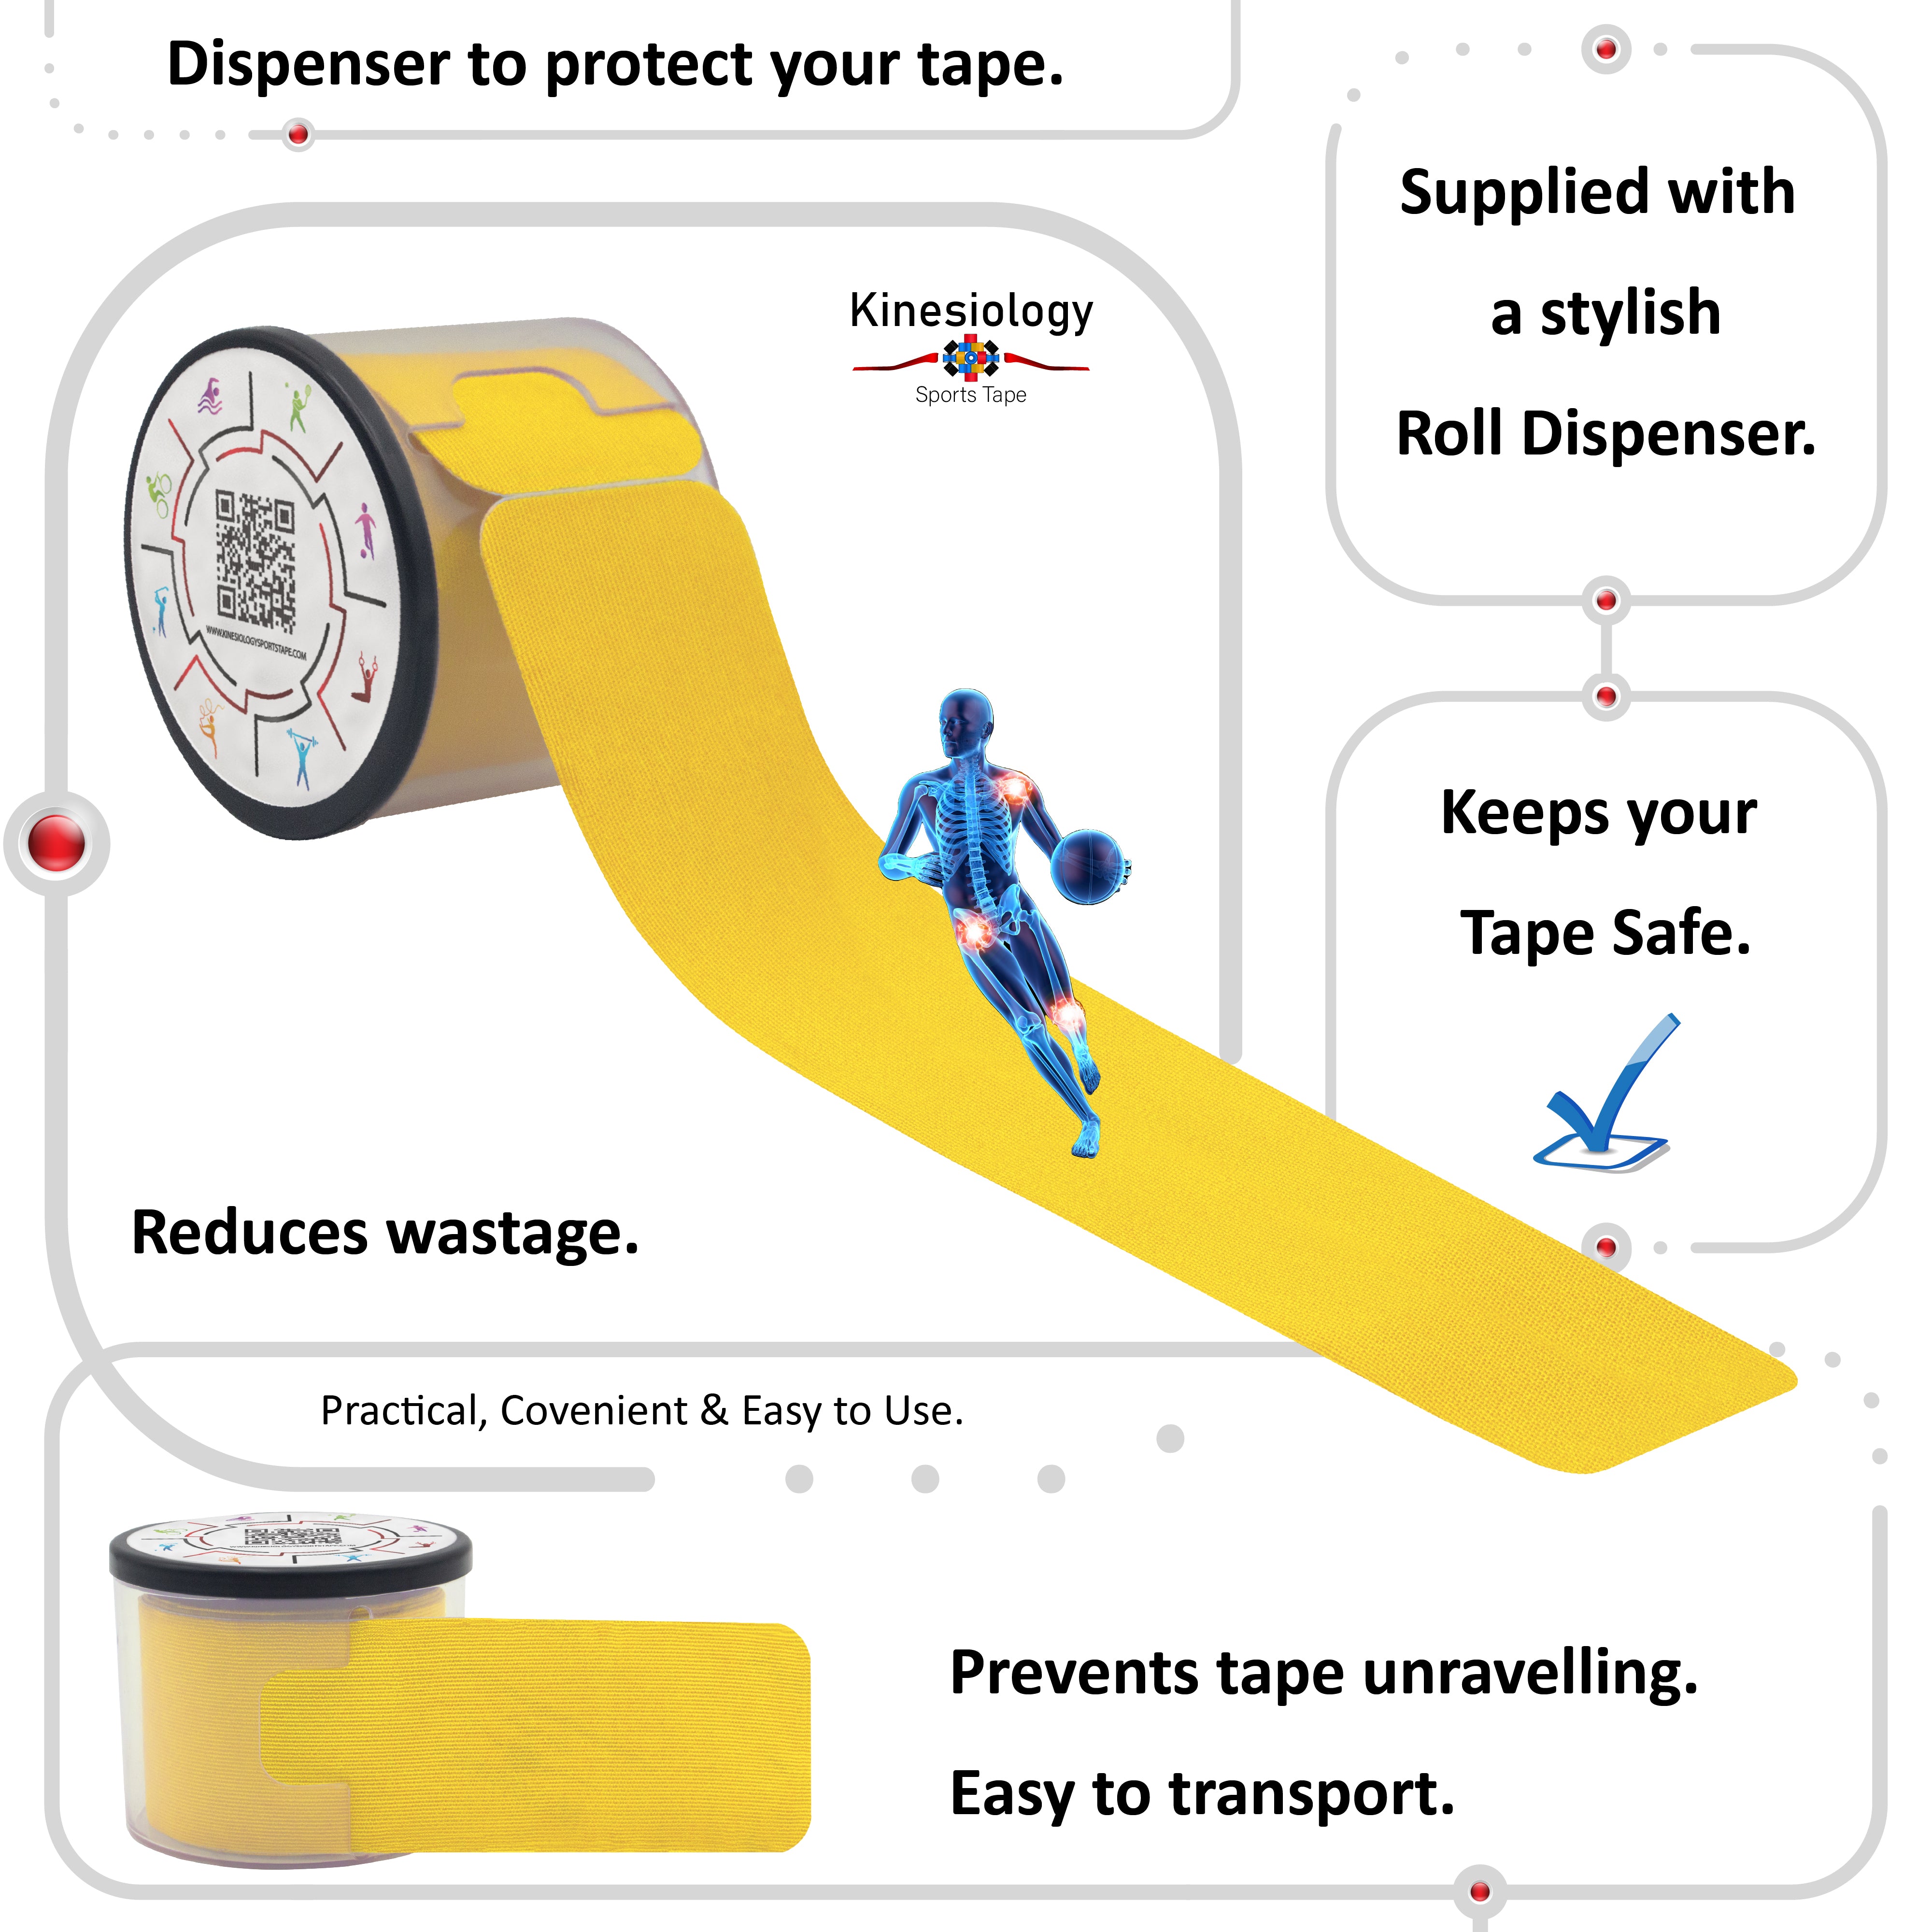 SOCK TAPE  PVC Sports Strapping Tape 19mm x 20m, YELLOW